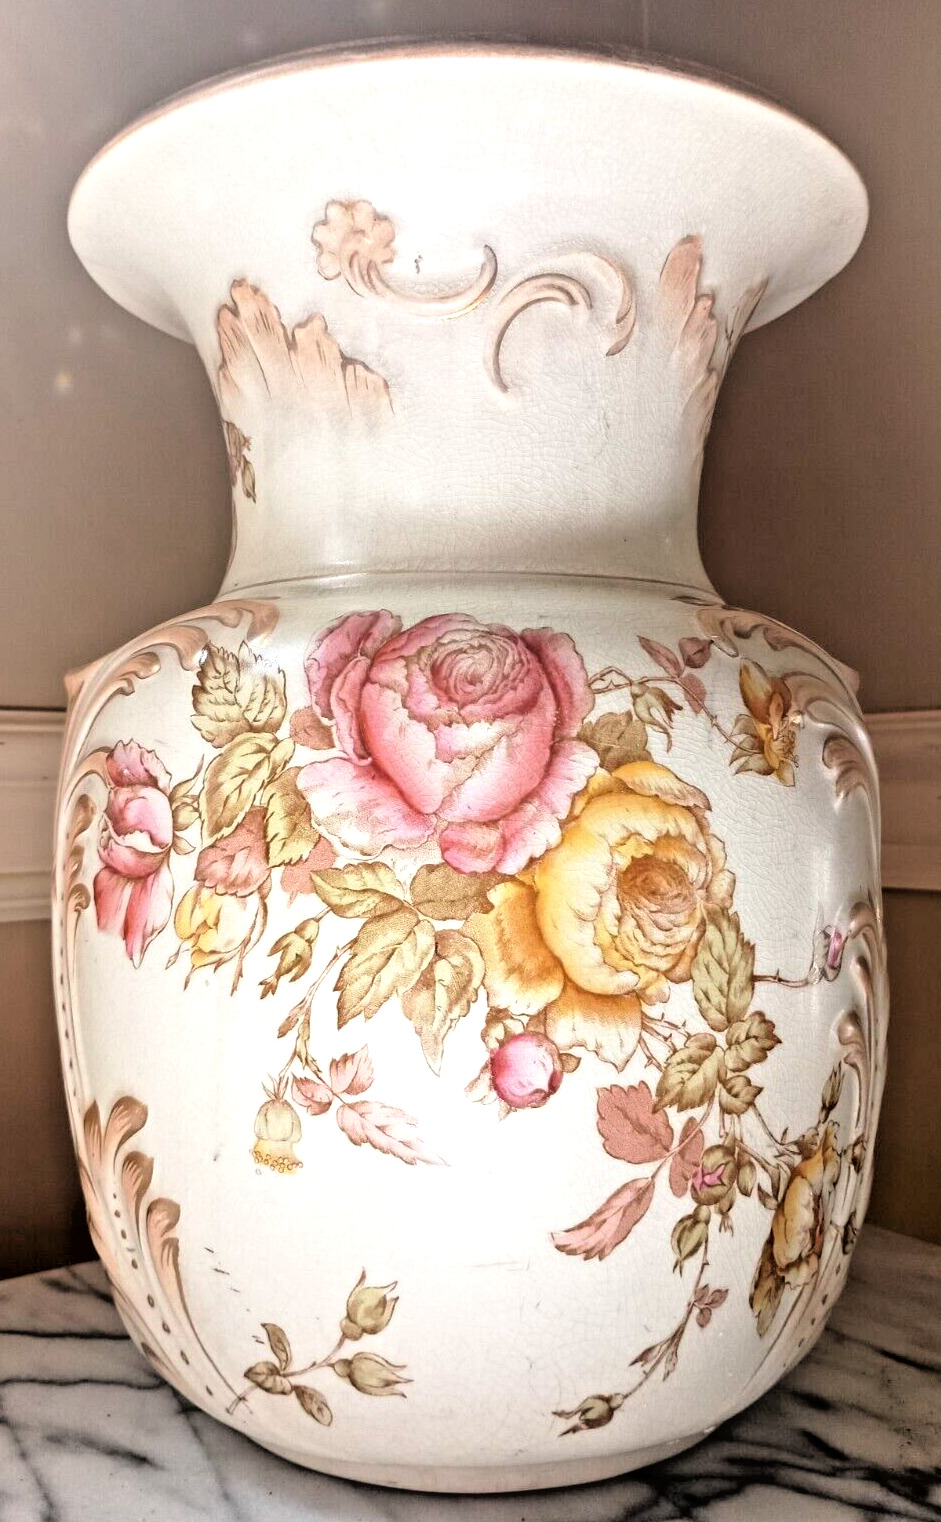 STUNNING XL Hand-painted Antique Vase w/Roses. raised relief & Gilt Gold details